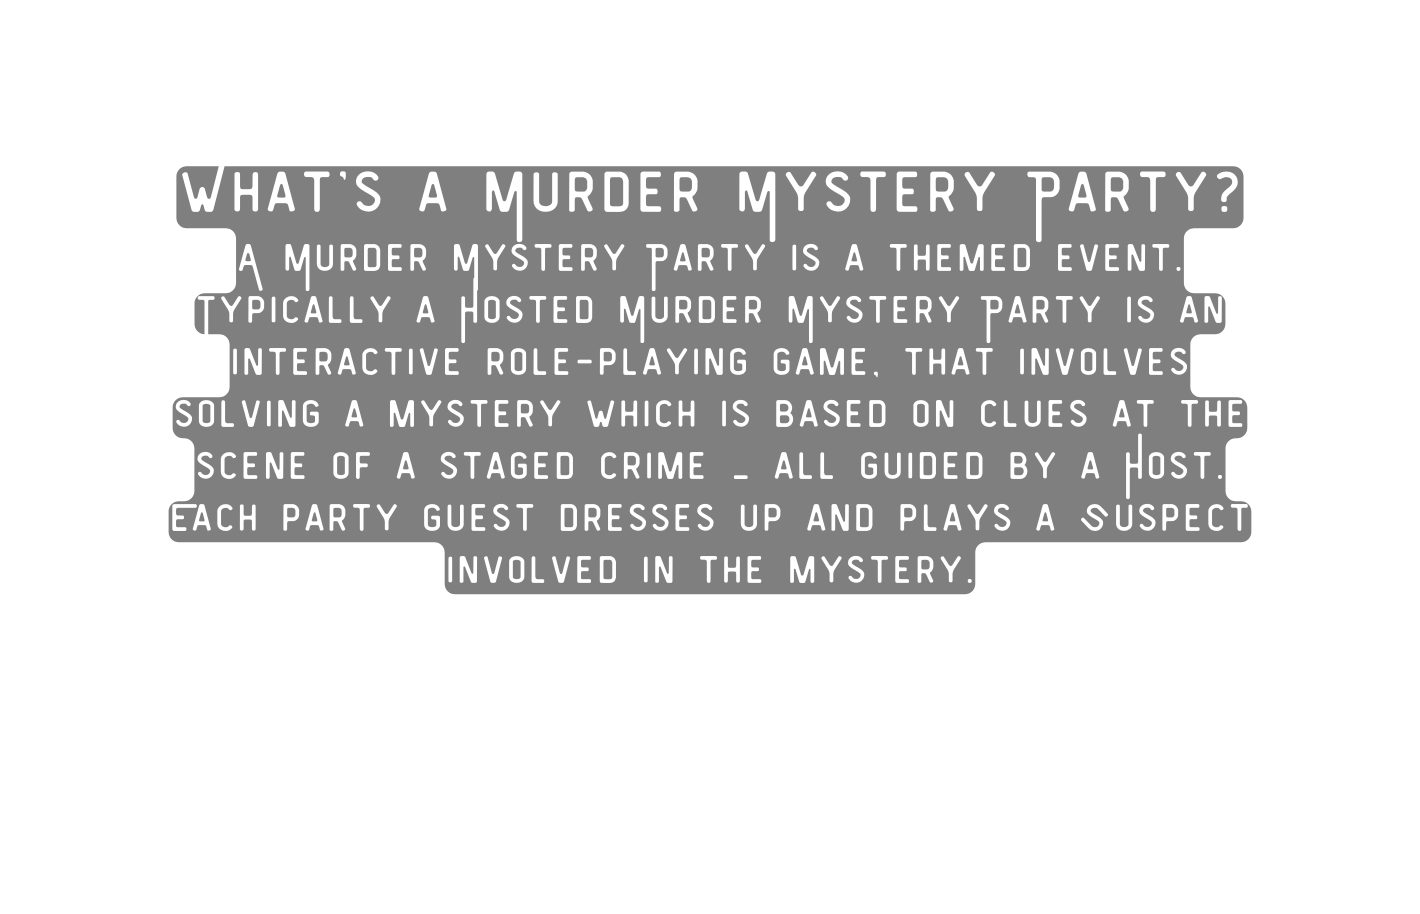 What s a Murder Mystery Party A Murder Mystery Party is a themed event Typically a Hosted Murder Mystery Party is an interactive role playing game that involves solving a mystery which is based on clues at the scene of a staged crime all guided by a Host Each party guest dresses up and plays a Suspect involved in the mystery